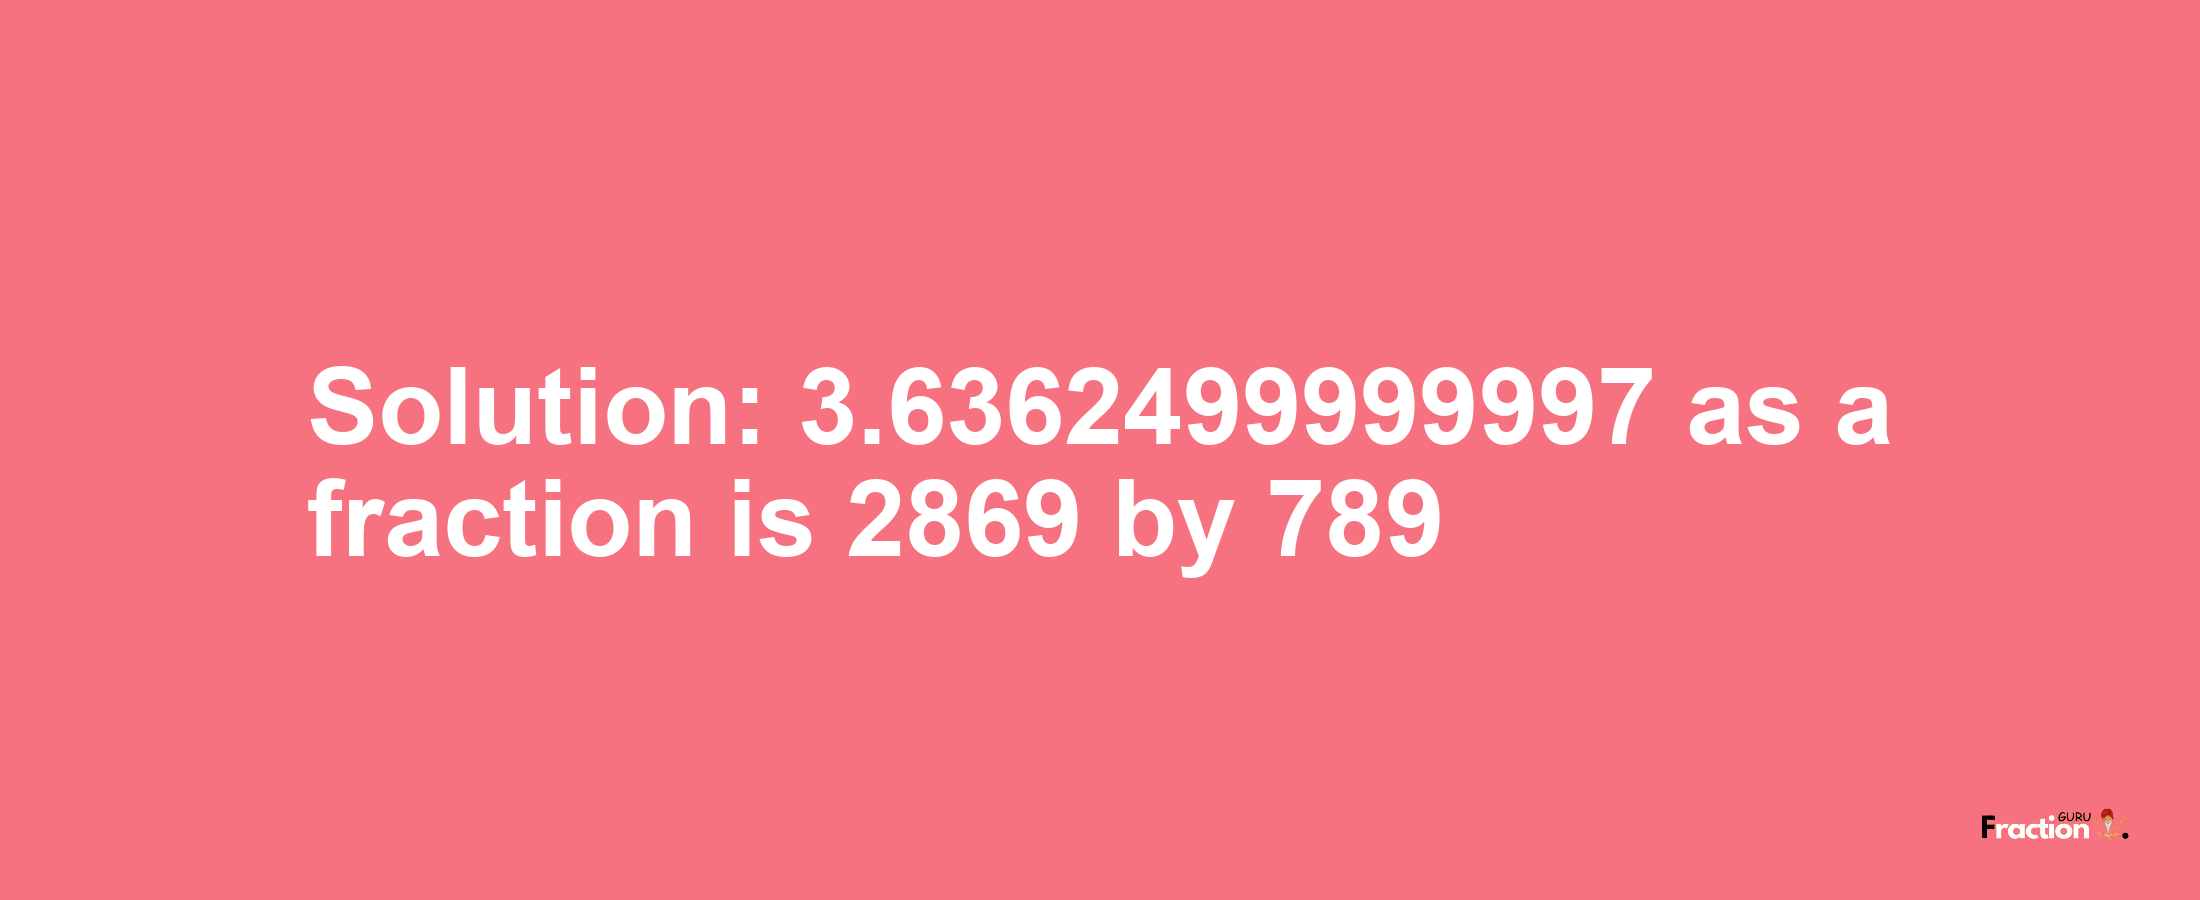 Solution:3.6362499999997 as a fraction is 2869/789